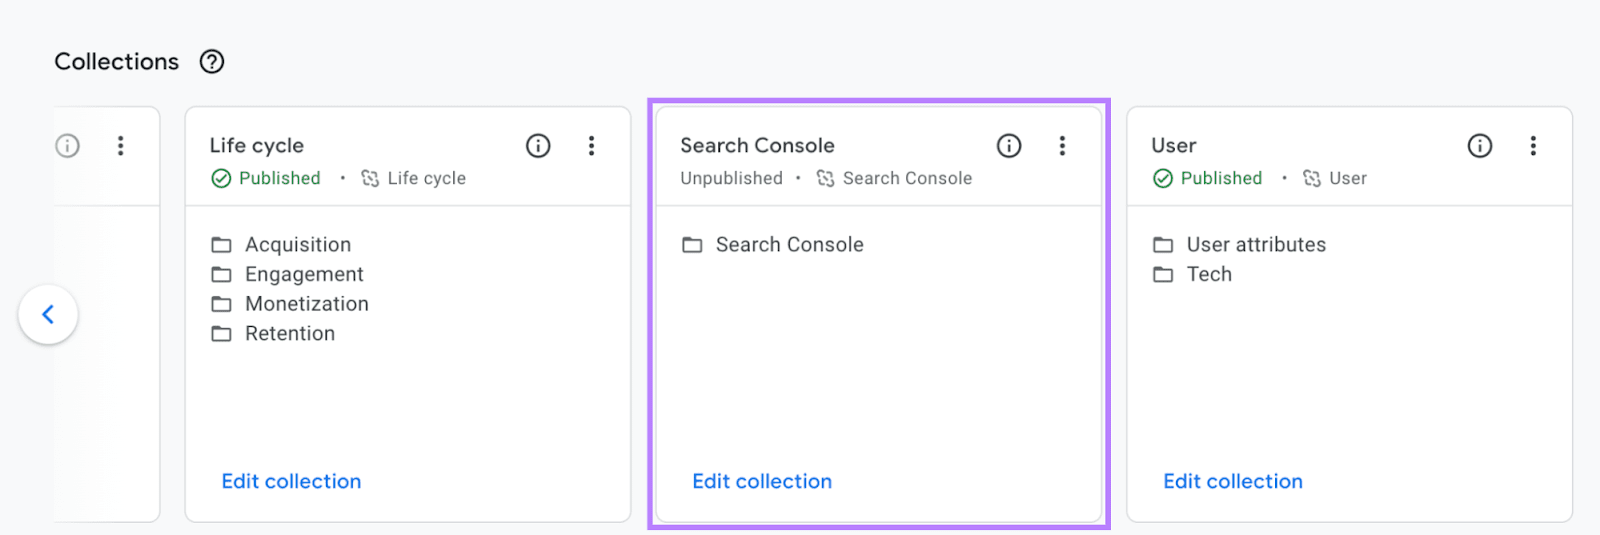 “Search Console” container  selected from the “Collections” section